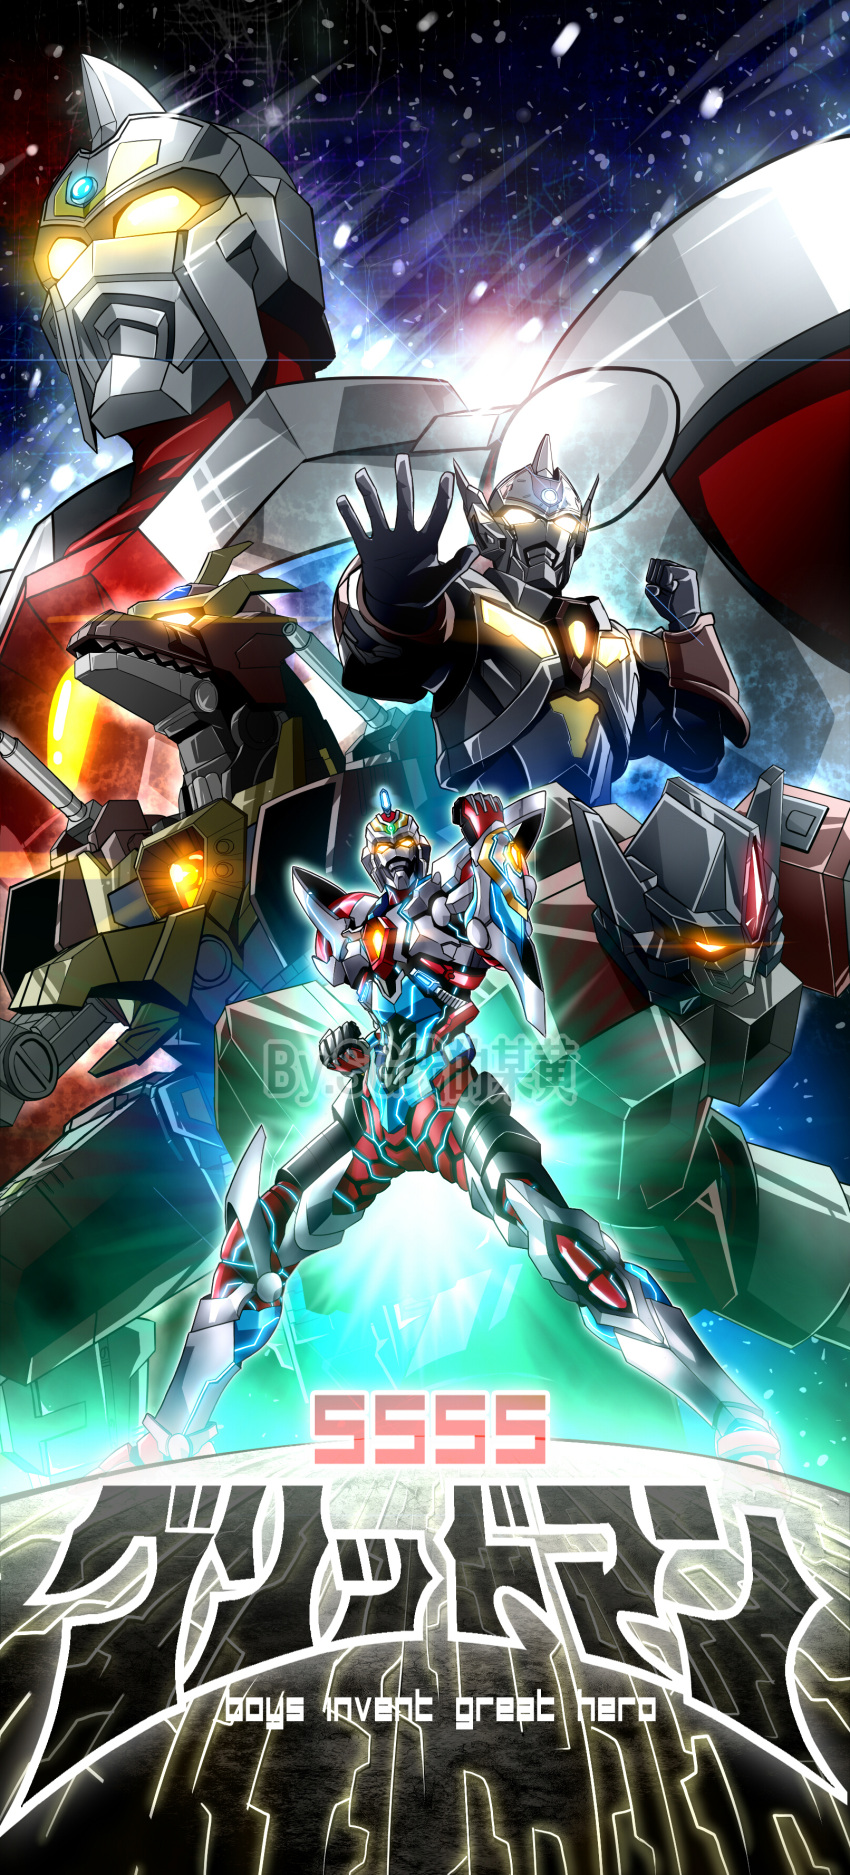 5boys absurdres armor artist_name character_name character_request clenched_hands denkou_choujin_gridman denkou_choujin_gridman:_boys_invent_great_hero dragon dyna_dragon fighting_stance galactic_small_yellow glowing glowing_eyes god_zenon gridman_(character) gridman_(ssss) gridman_sigma highres humanoid_robot legs_apart male_focus mecha multiple_boys neon_trim no_humans orange_eyes pose shoulder_armor shoulder_cannon ssss.gridman standing tagme tokusatsu watermark yellow_eyes